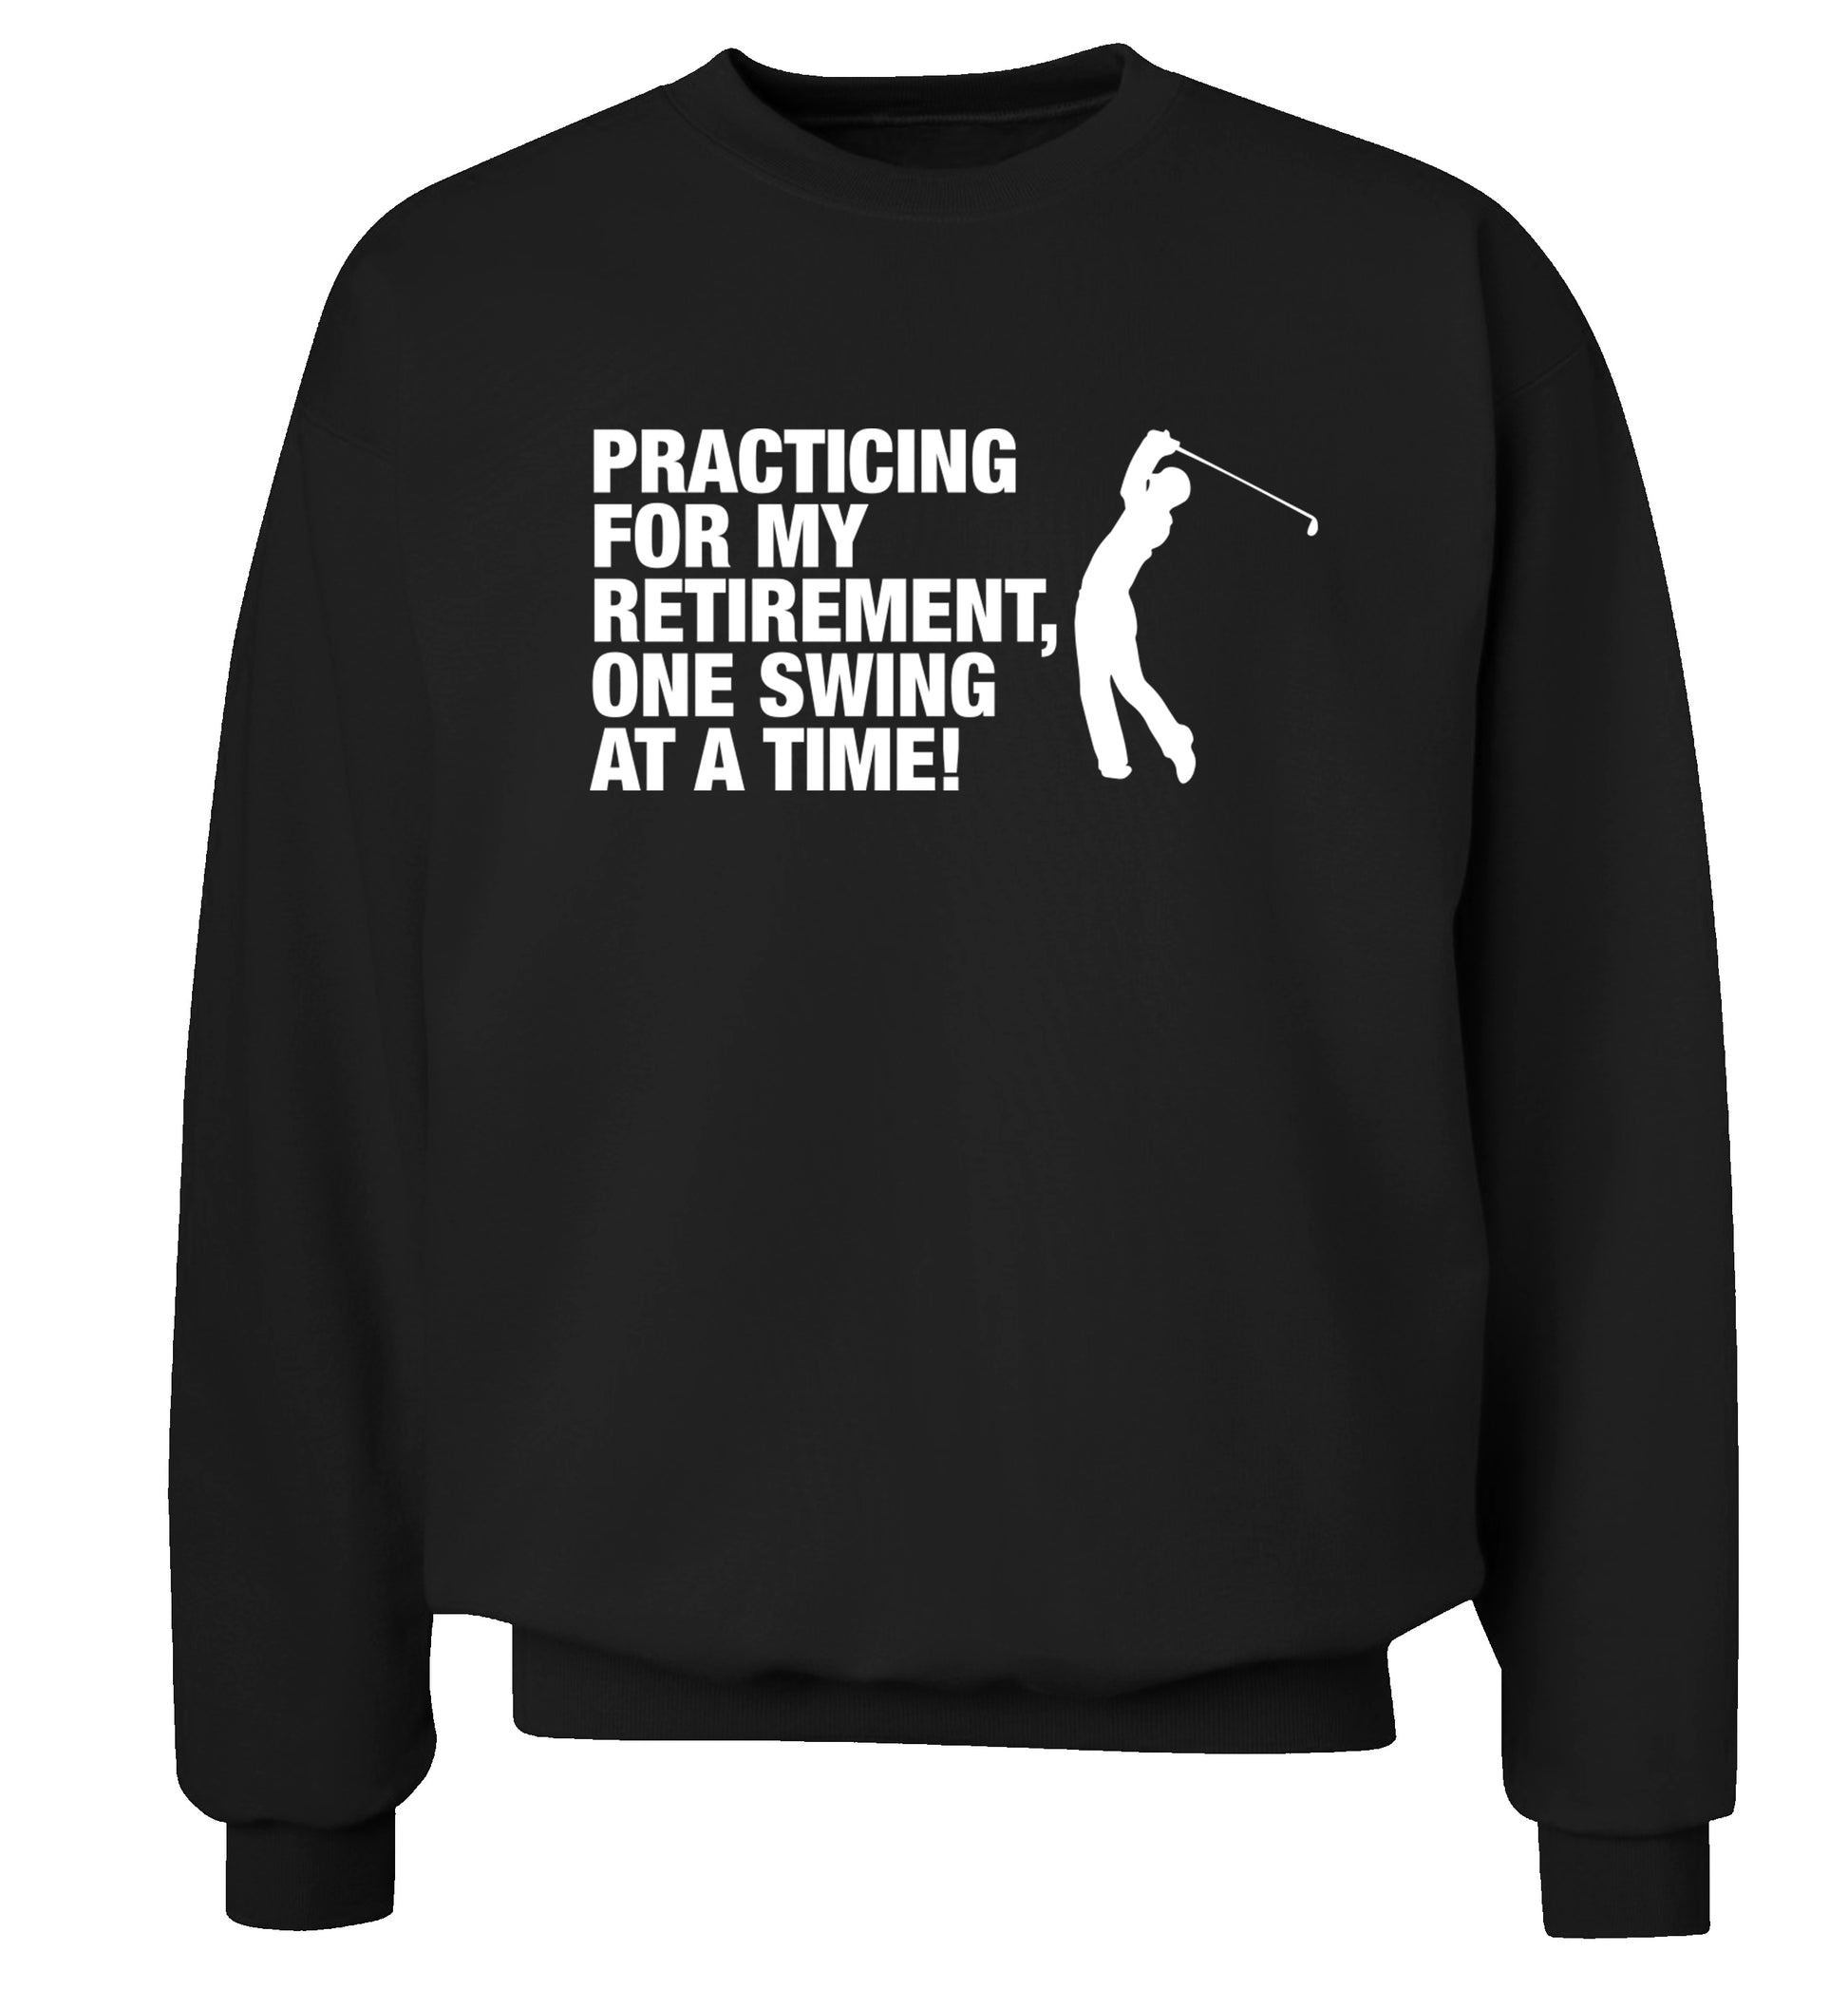 Practicing for my retirement one swing at a time Adult's unisex black Sweater 2XL